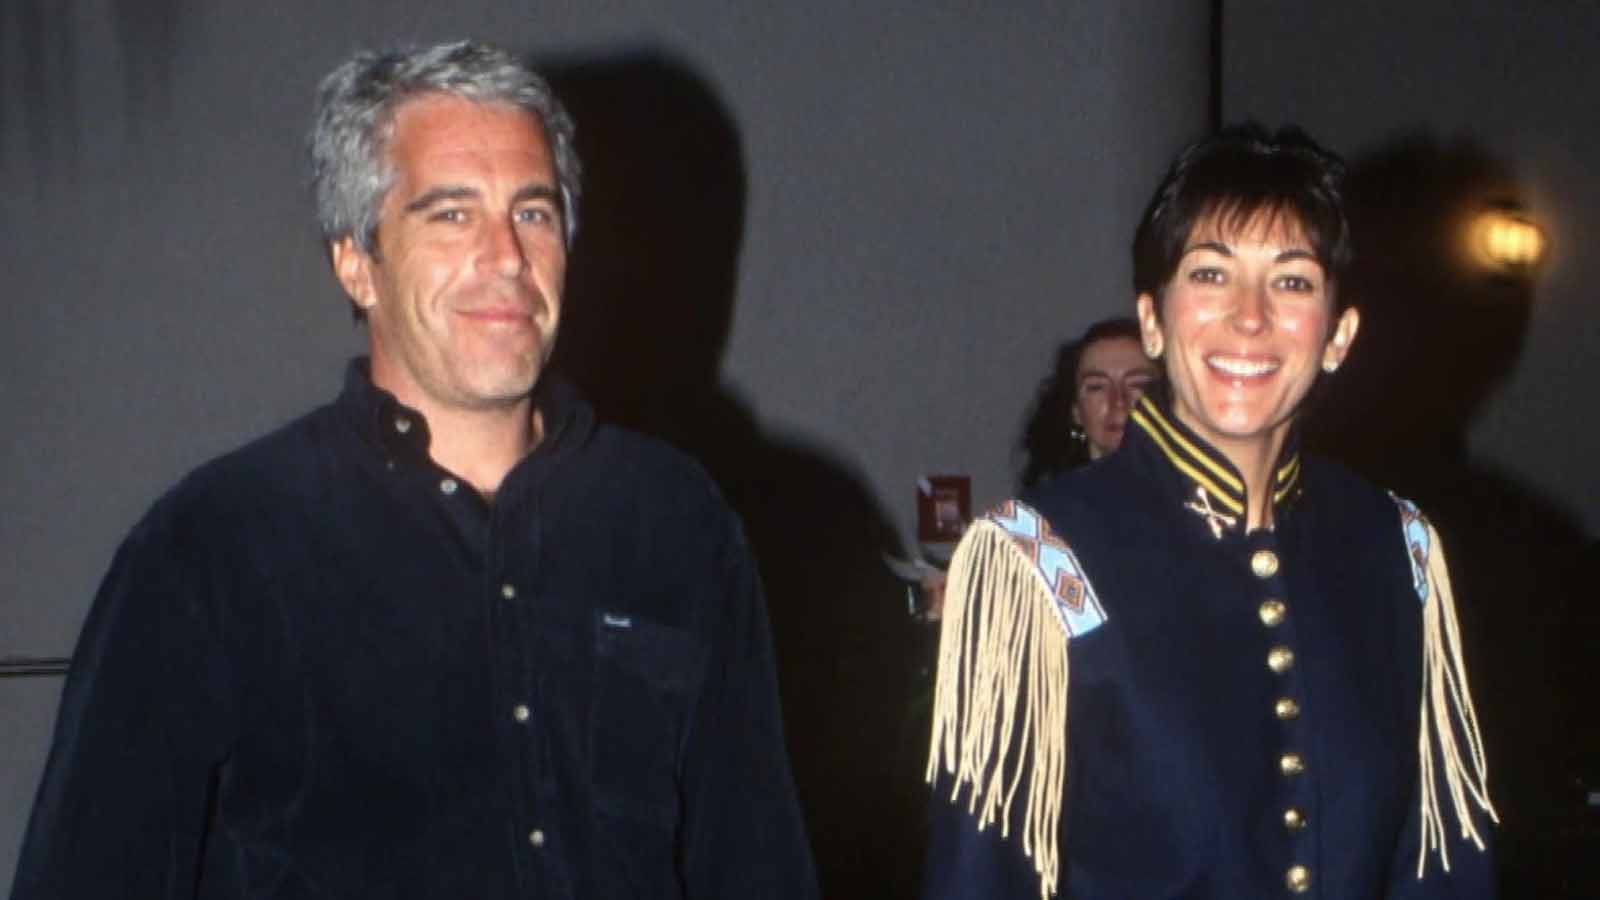 A new woman is speaking out now against Ghislaine Maxwell and Jeffrey Epstein. Hear her harrowing story of abuse at the hands of the socialites.